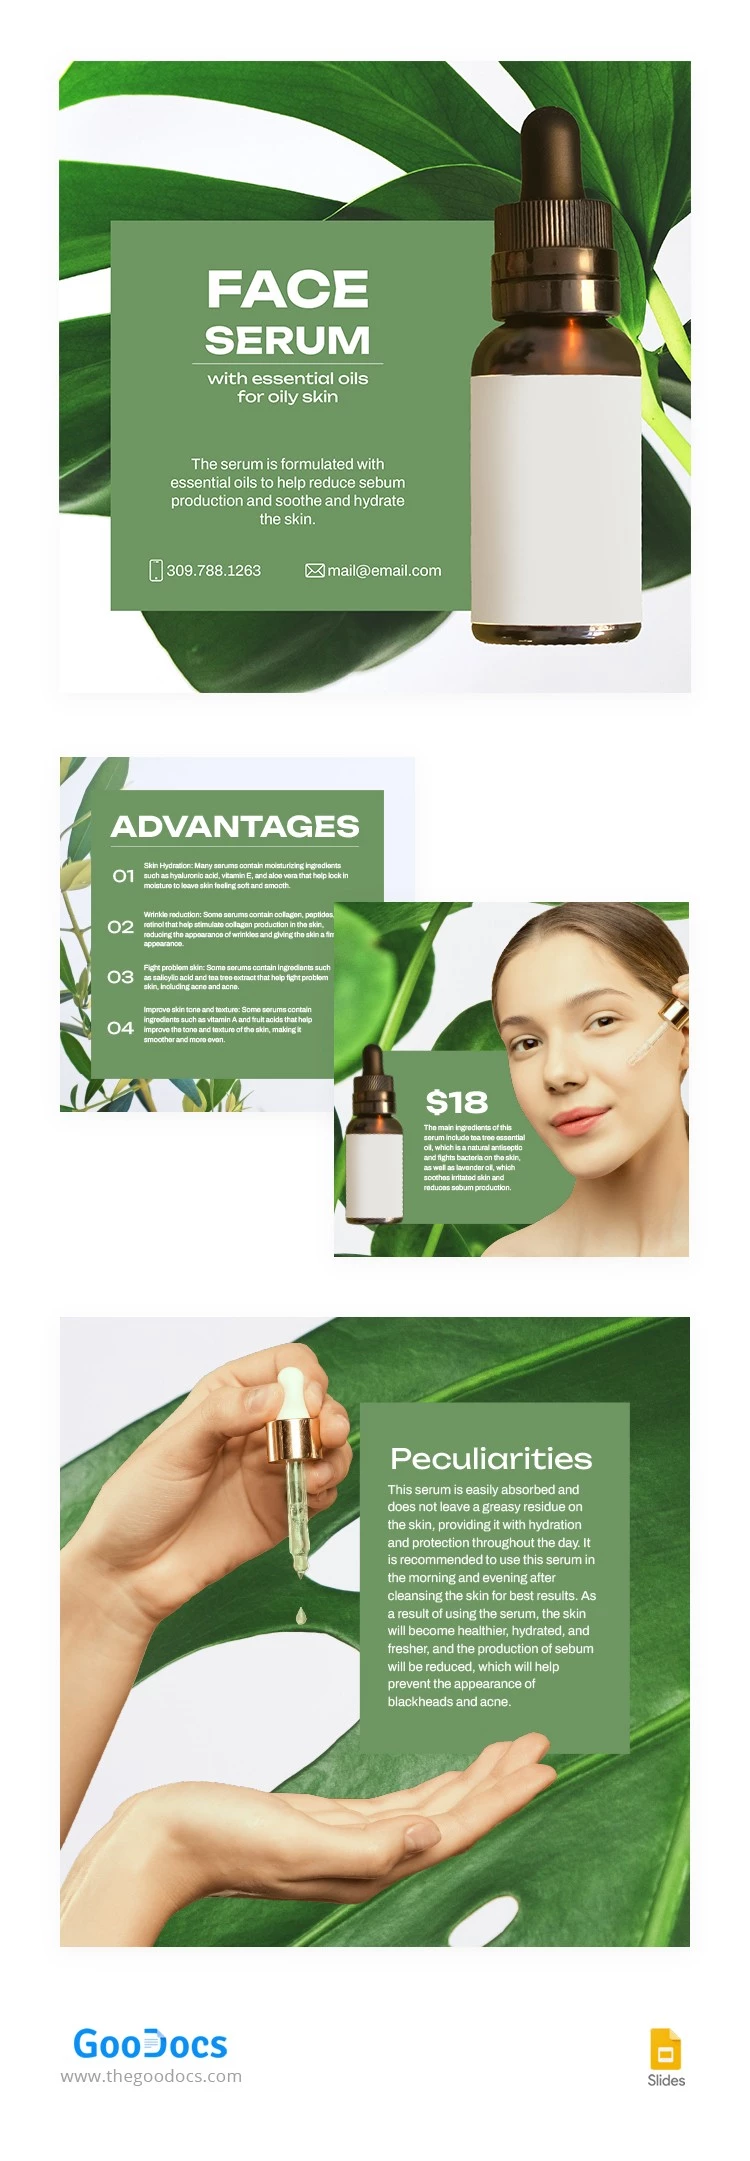 Green Face Serum Amazon Products - free Google Docs Template - 10066106